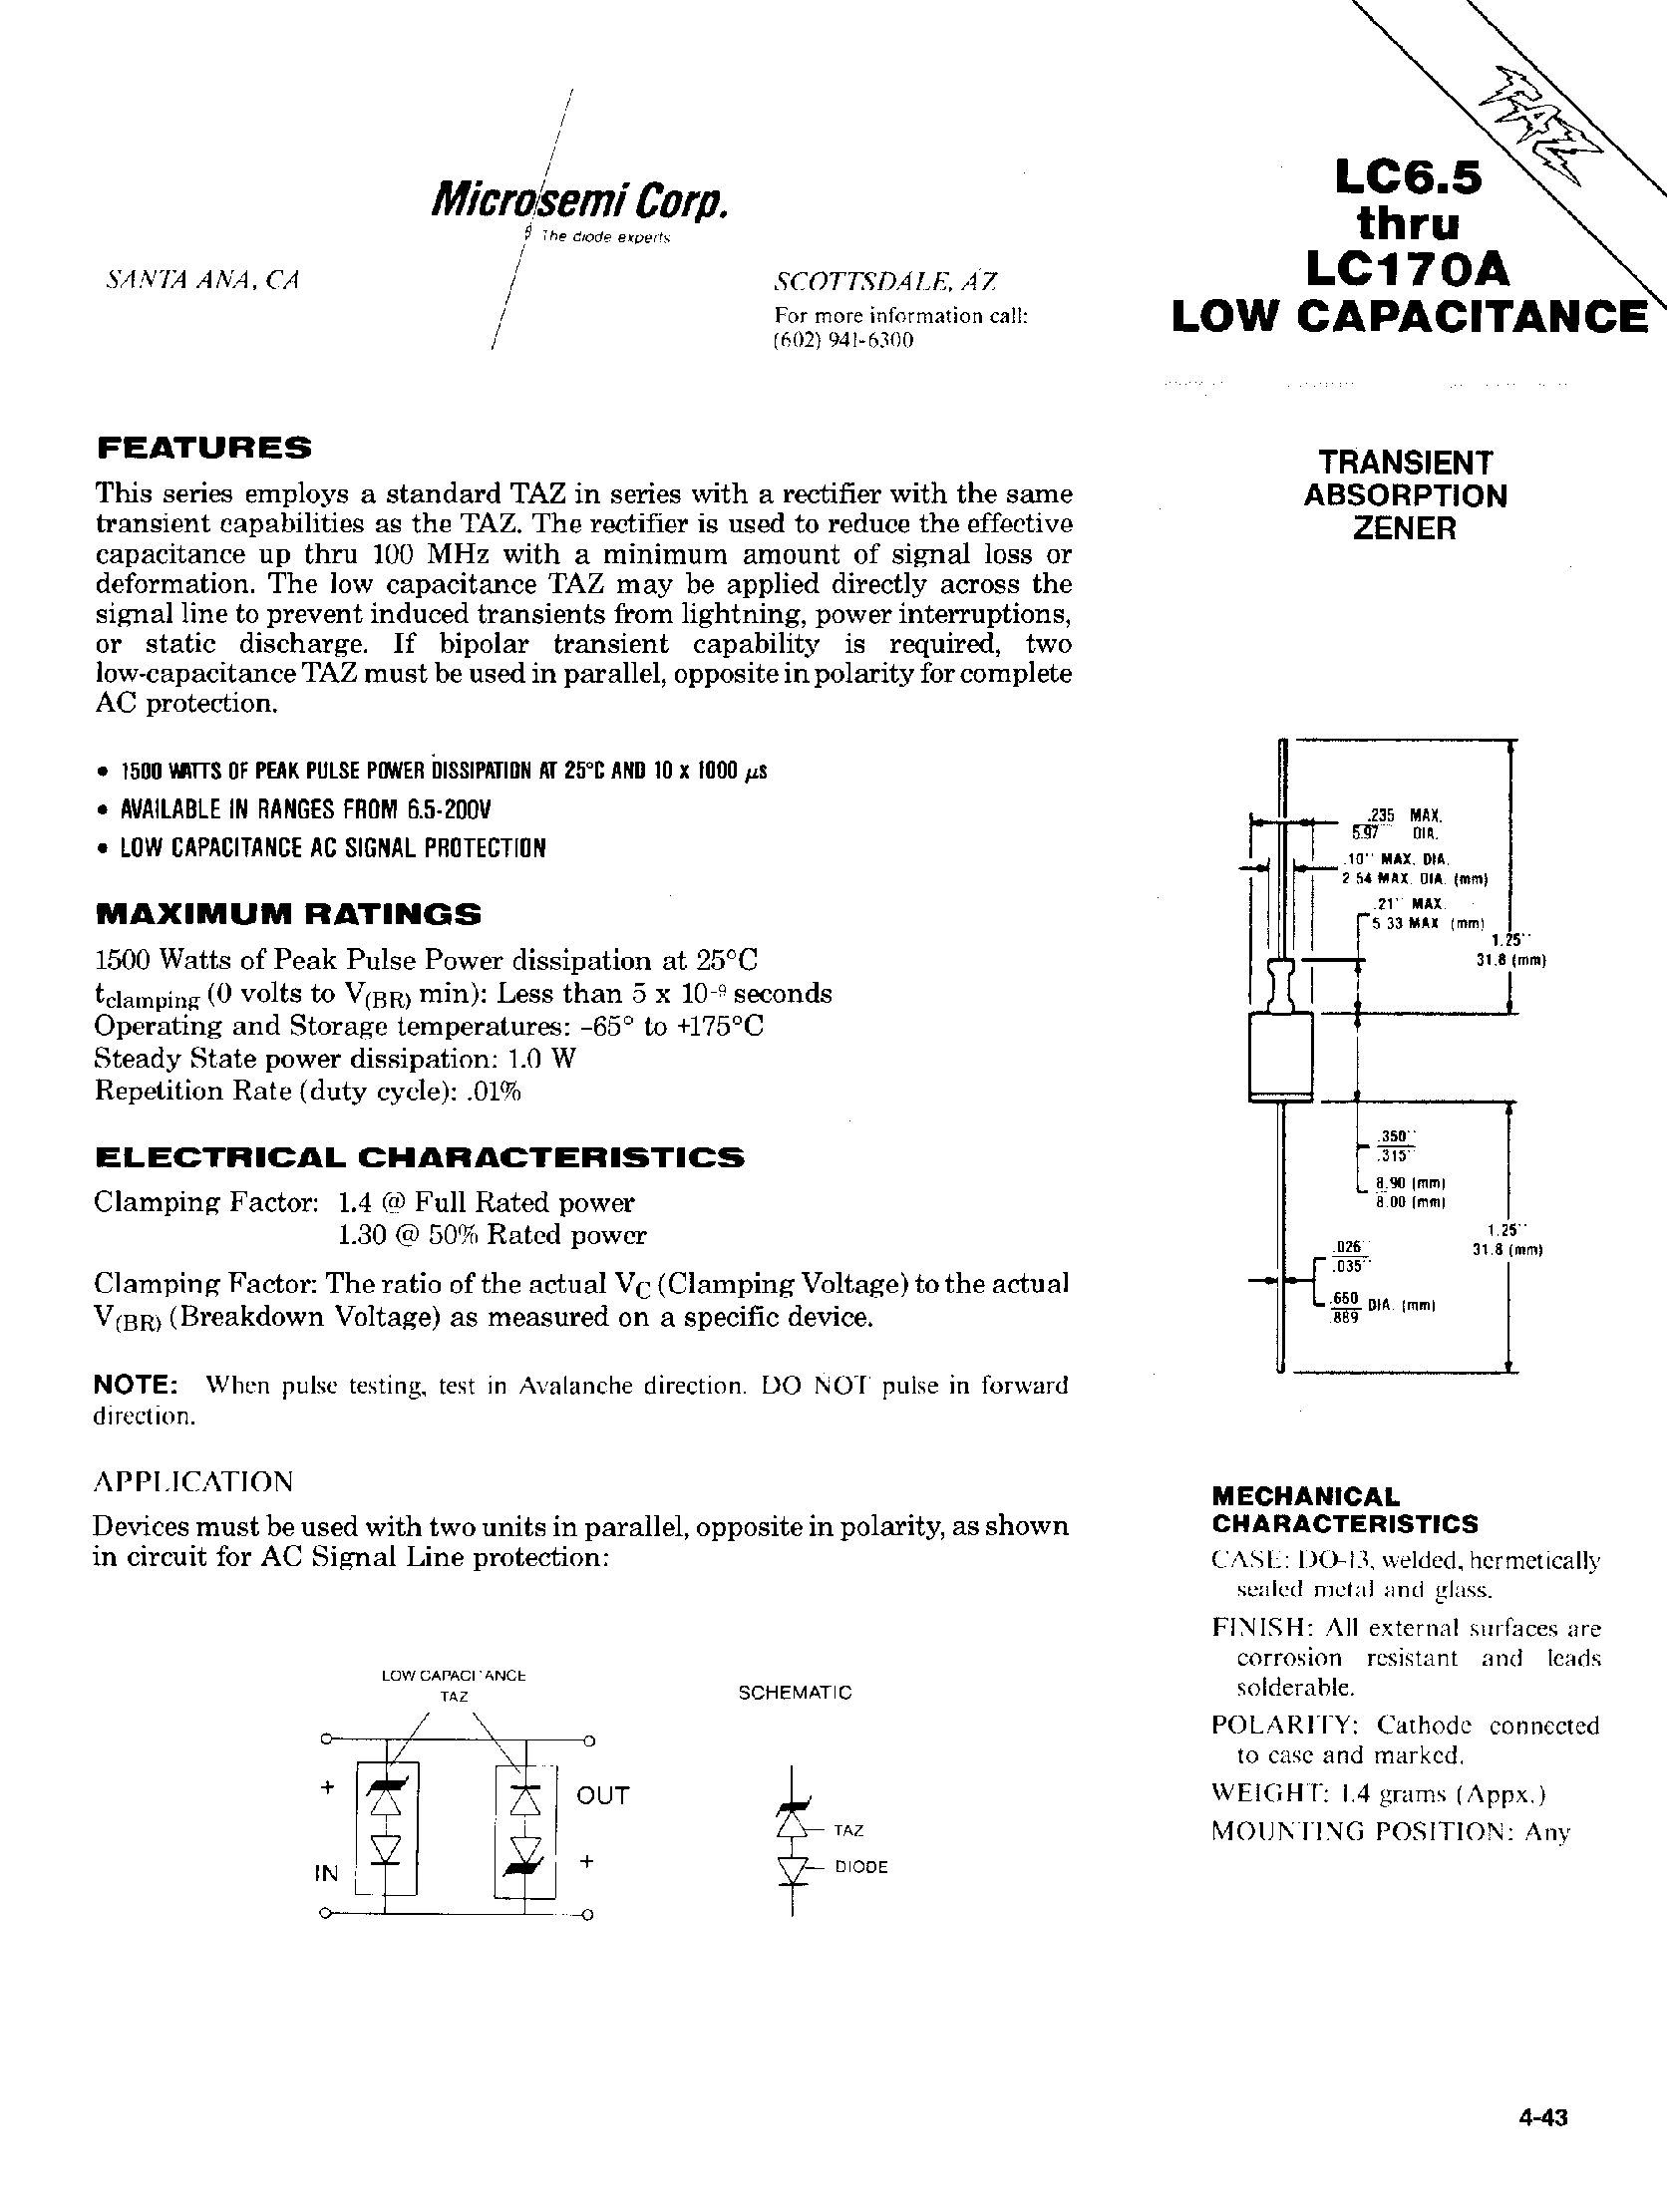 Даташит LC150A - TRANSIENT ABSORPTION ZENER страница 1